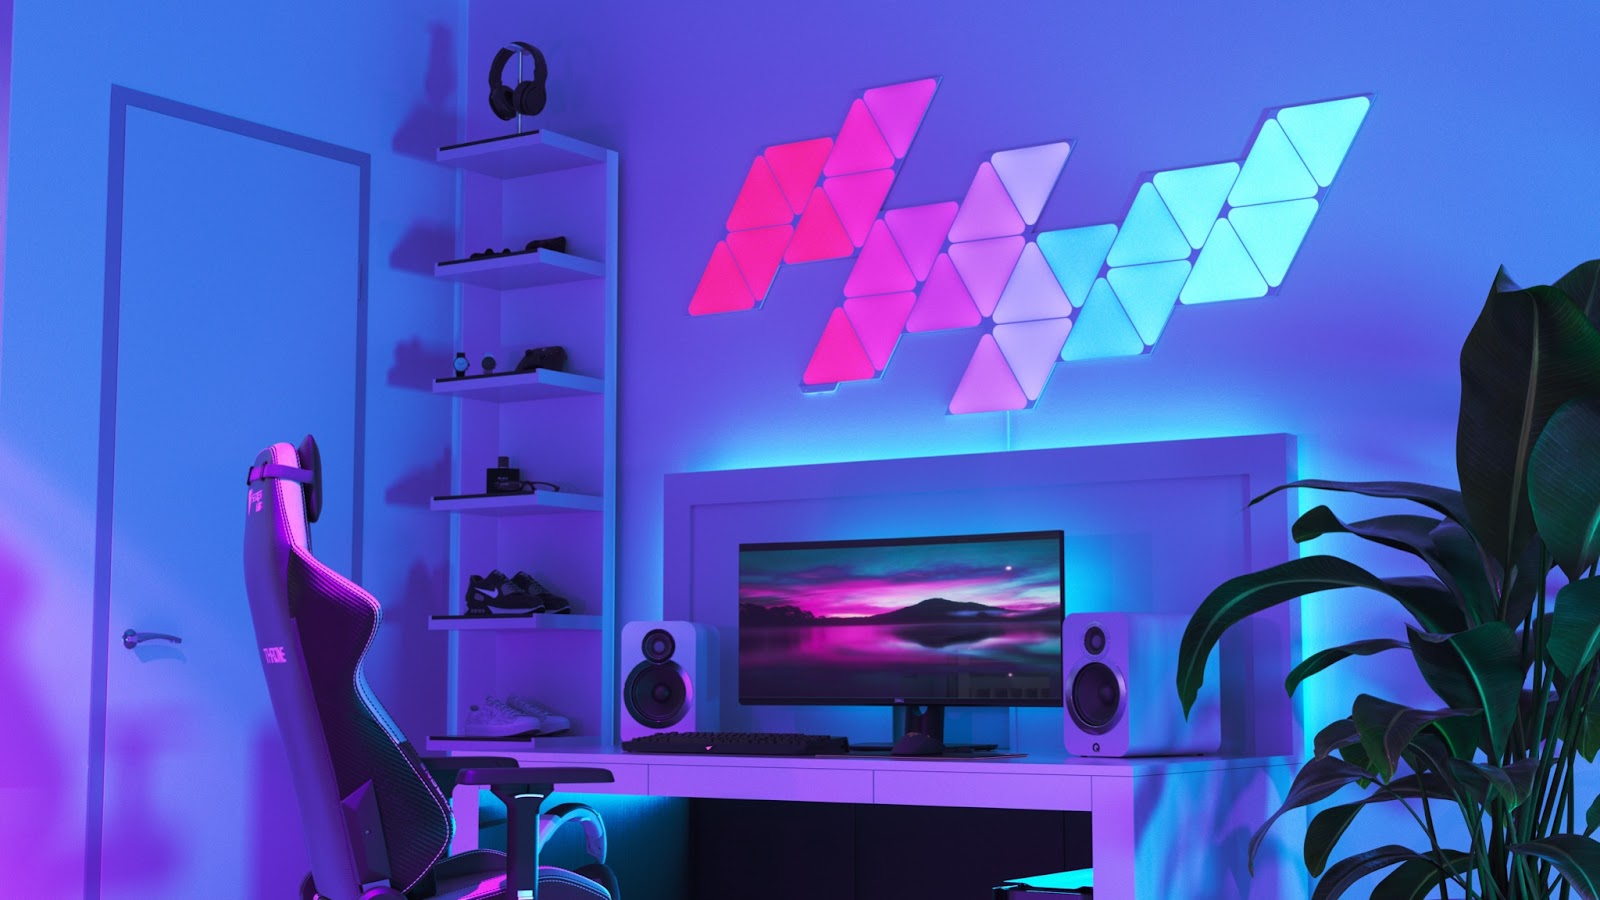 Nanoleaf Shapes Triangles light panels in gaming room setup worth the price